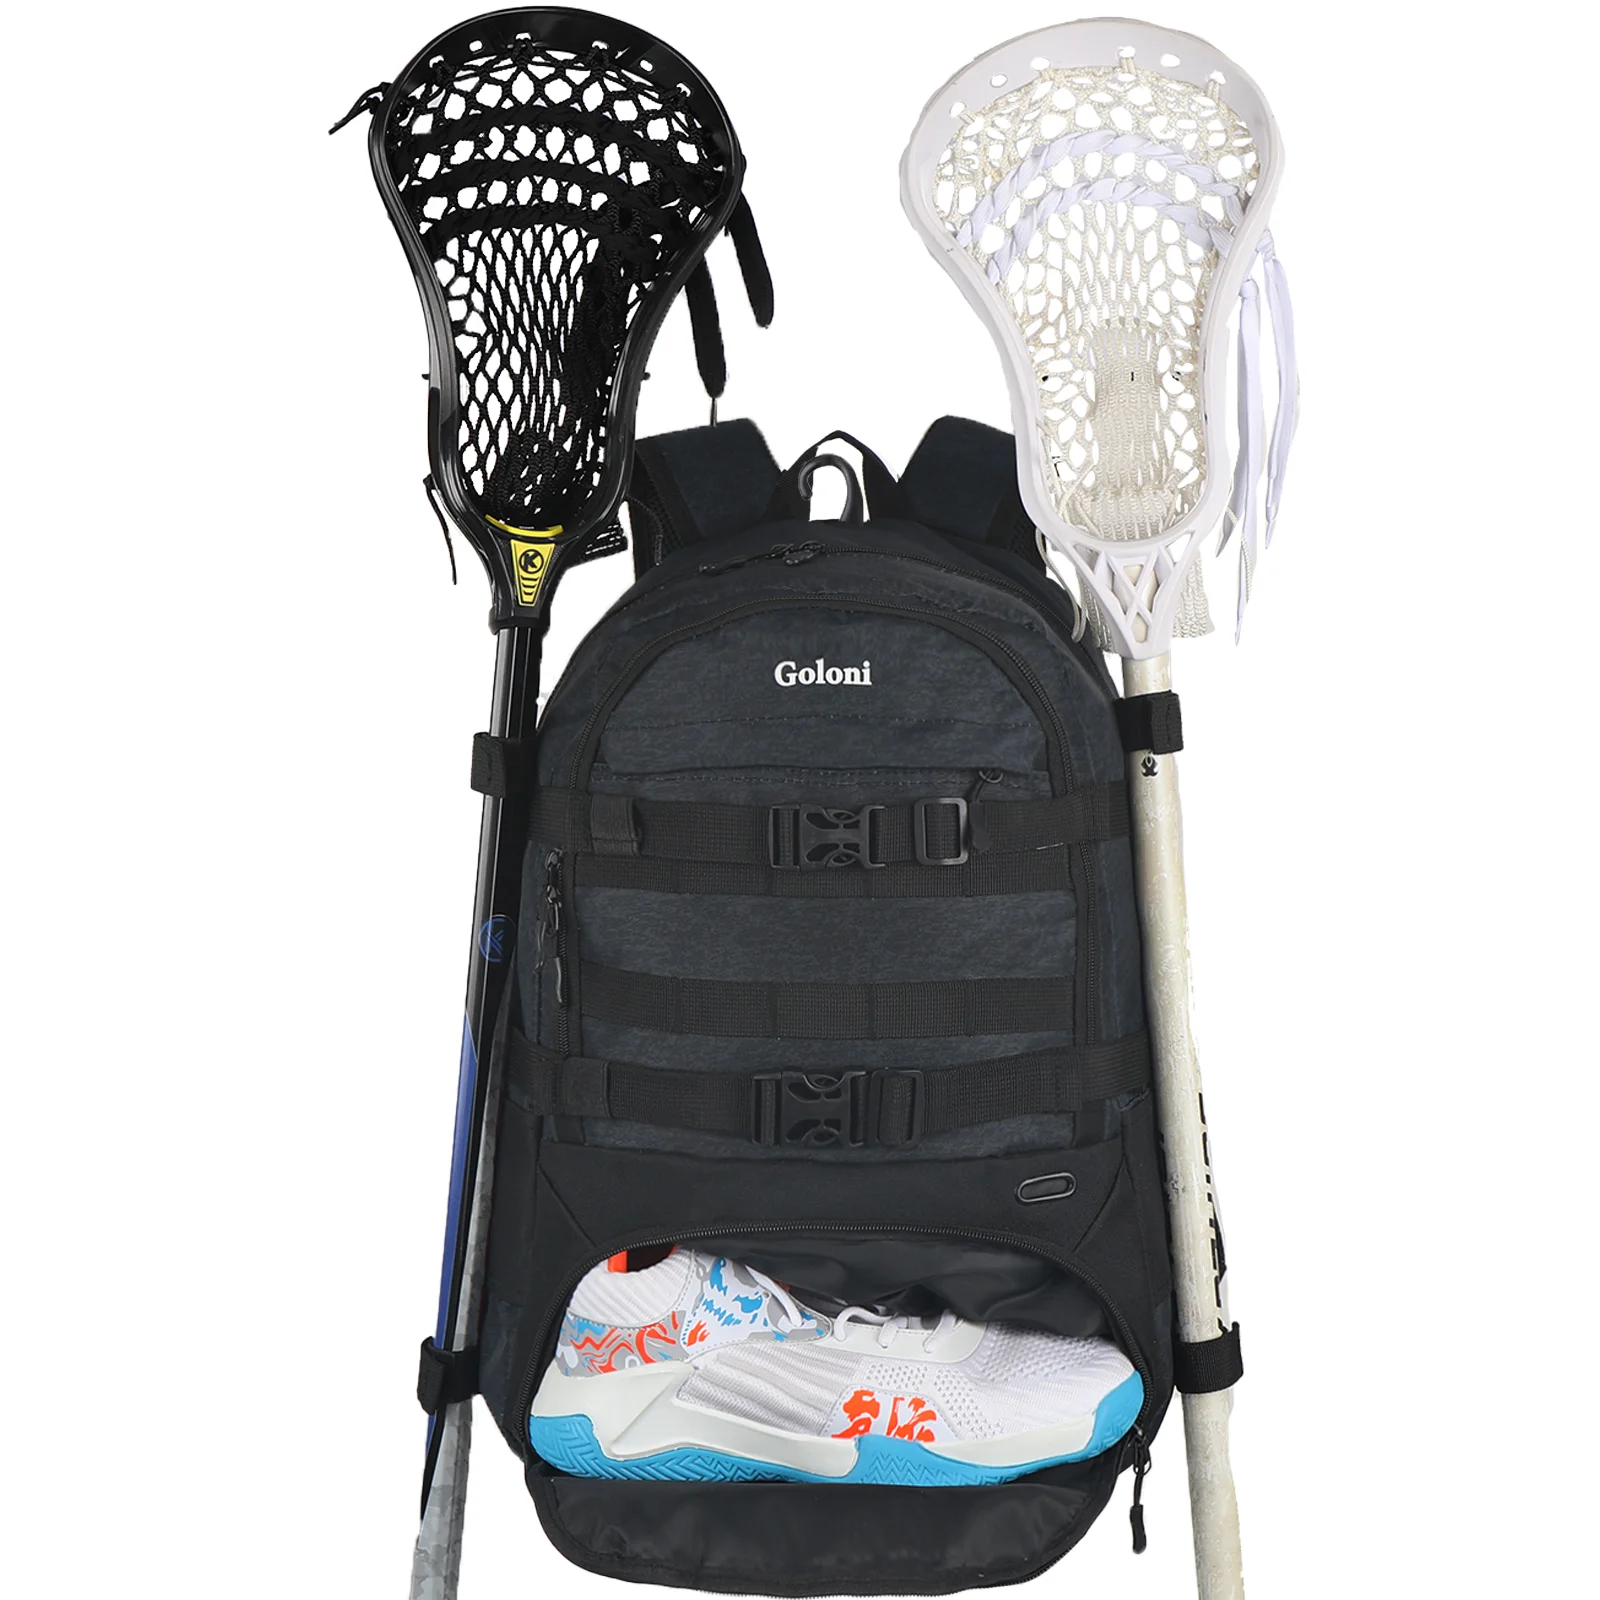 

Large Lacrosse Equipment Backpack with Two Sticks holder and Separate Cleats Compartment Field Hockey Bag